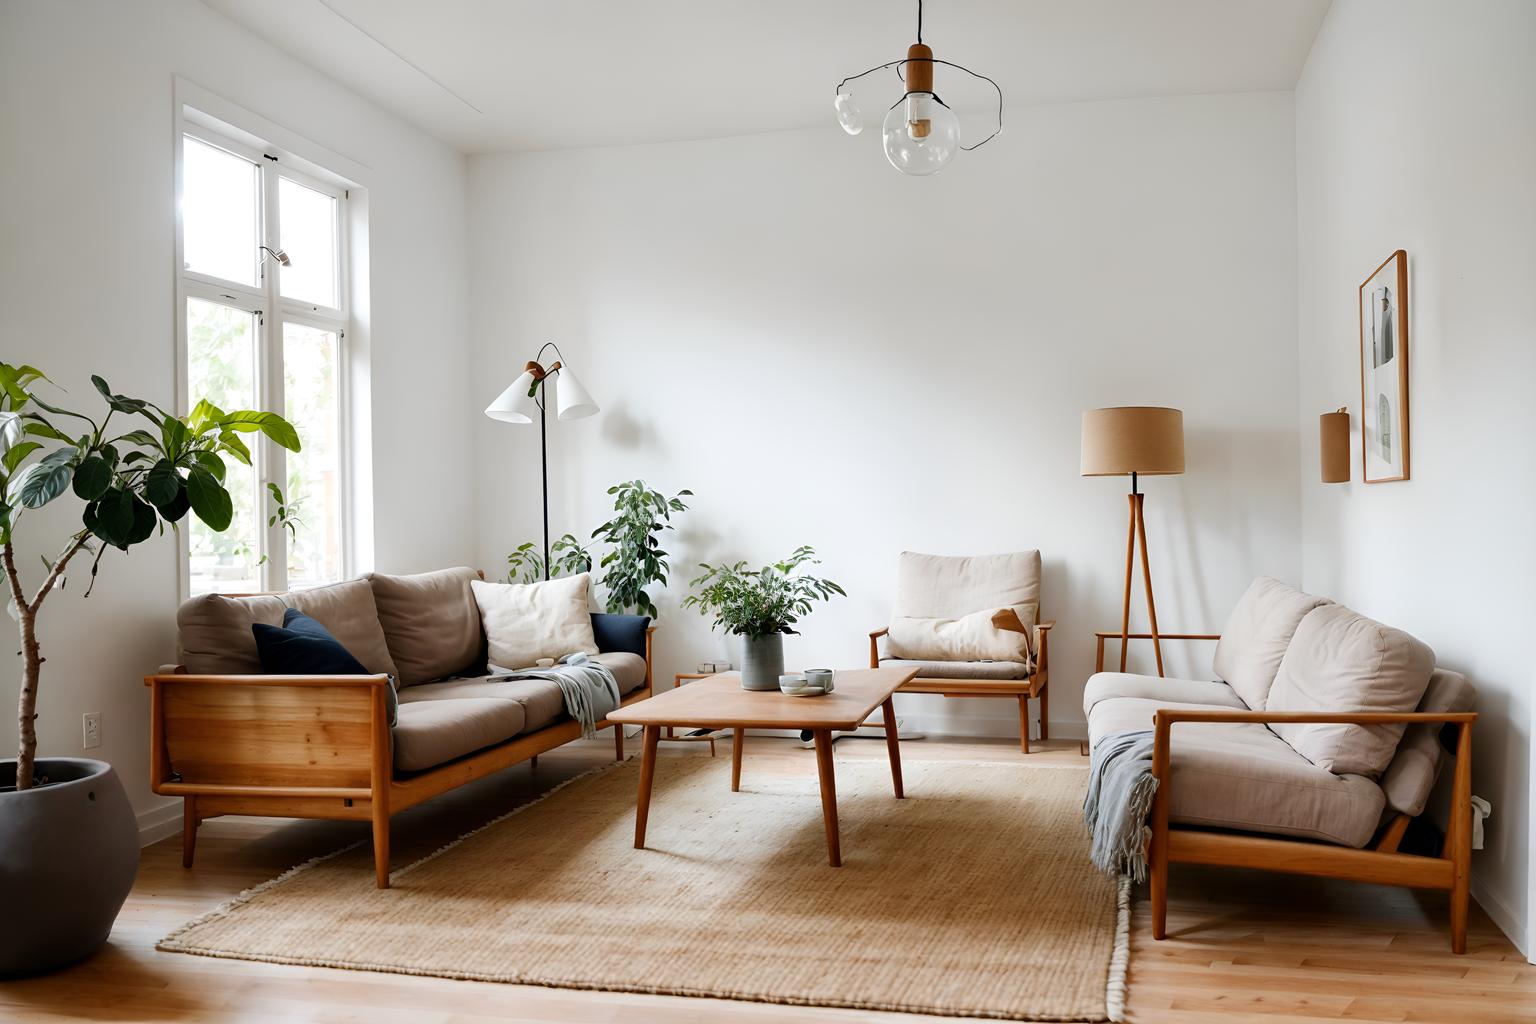 Airbnb-style (living room interior) With plant and furniture and sofa and occasional tables and rug and electric lamps and bookshelves and coffee tables. . With Natural Materials and Elements and Scandinavian style and Simple, Clean Lines and Simplistic Furniture and Practicality and Functionality and Open and Natural Lighting and Simple Color Palette and Neutral Walls and Textures and Natural Materials and Elements. . Cinematic photo, highly detailed, cinematic lighting, ultra-detailed, ultrarealistic, photorealism, 8k. Airbnb interior design style